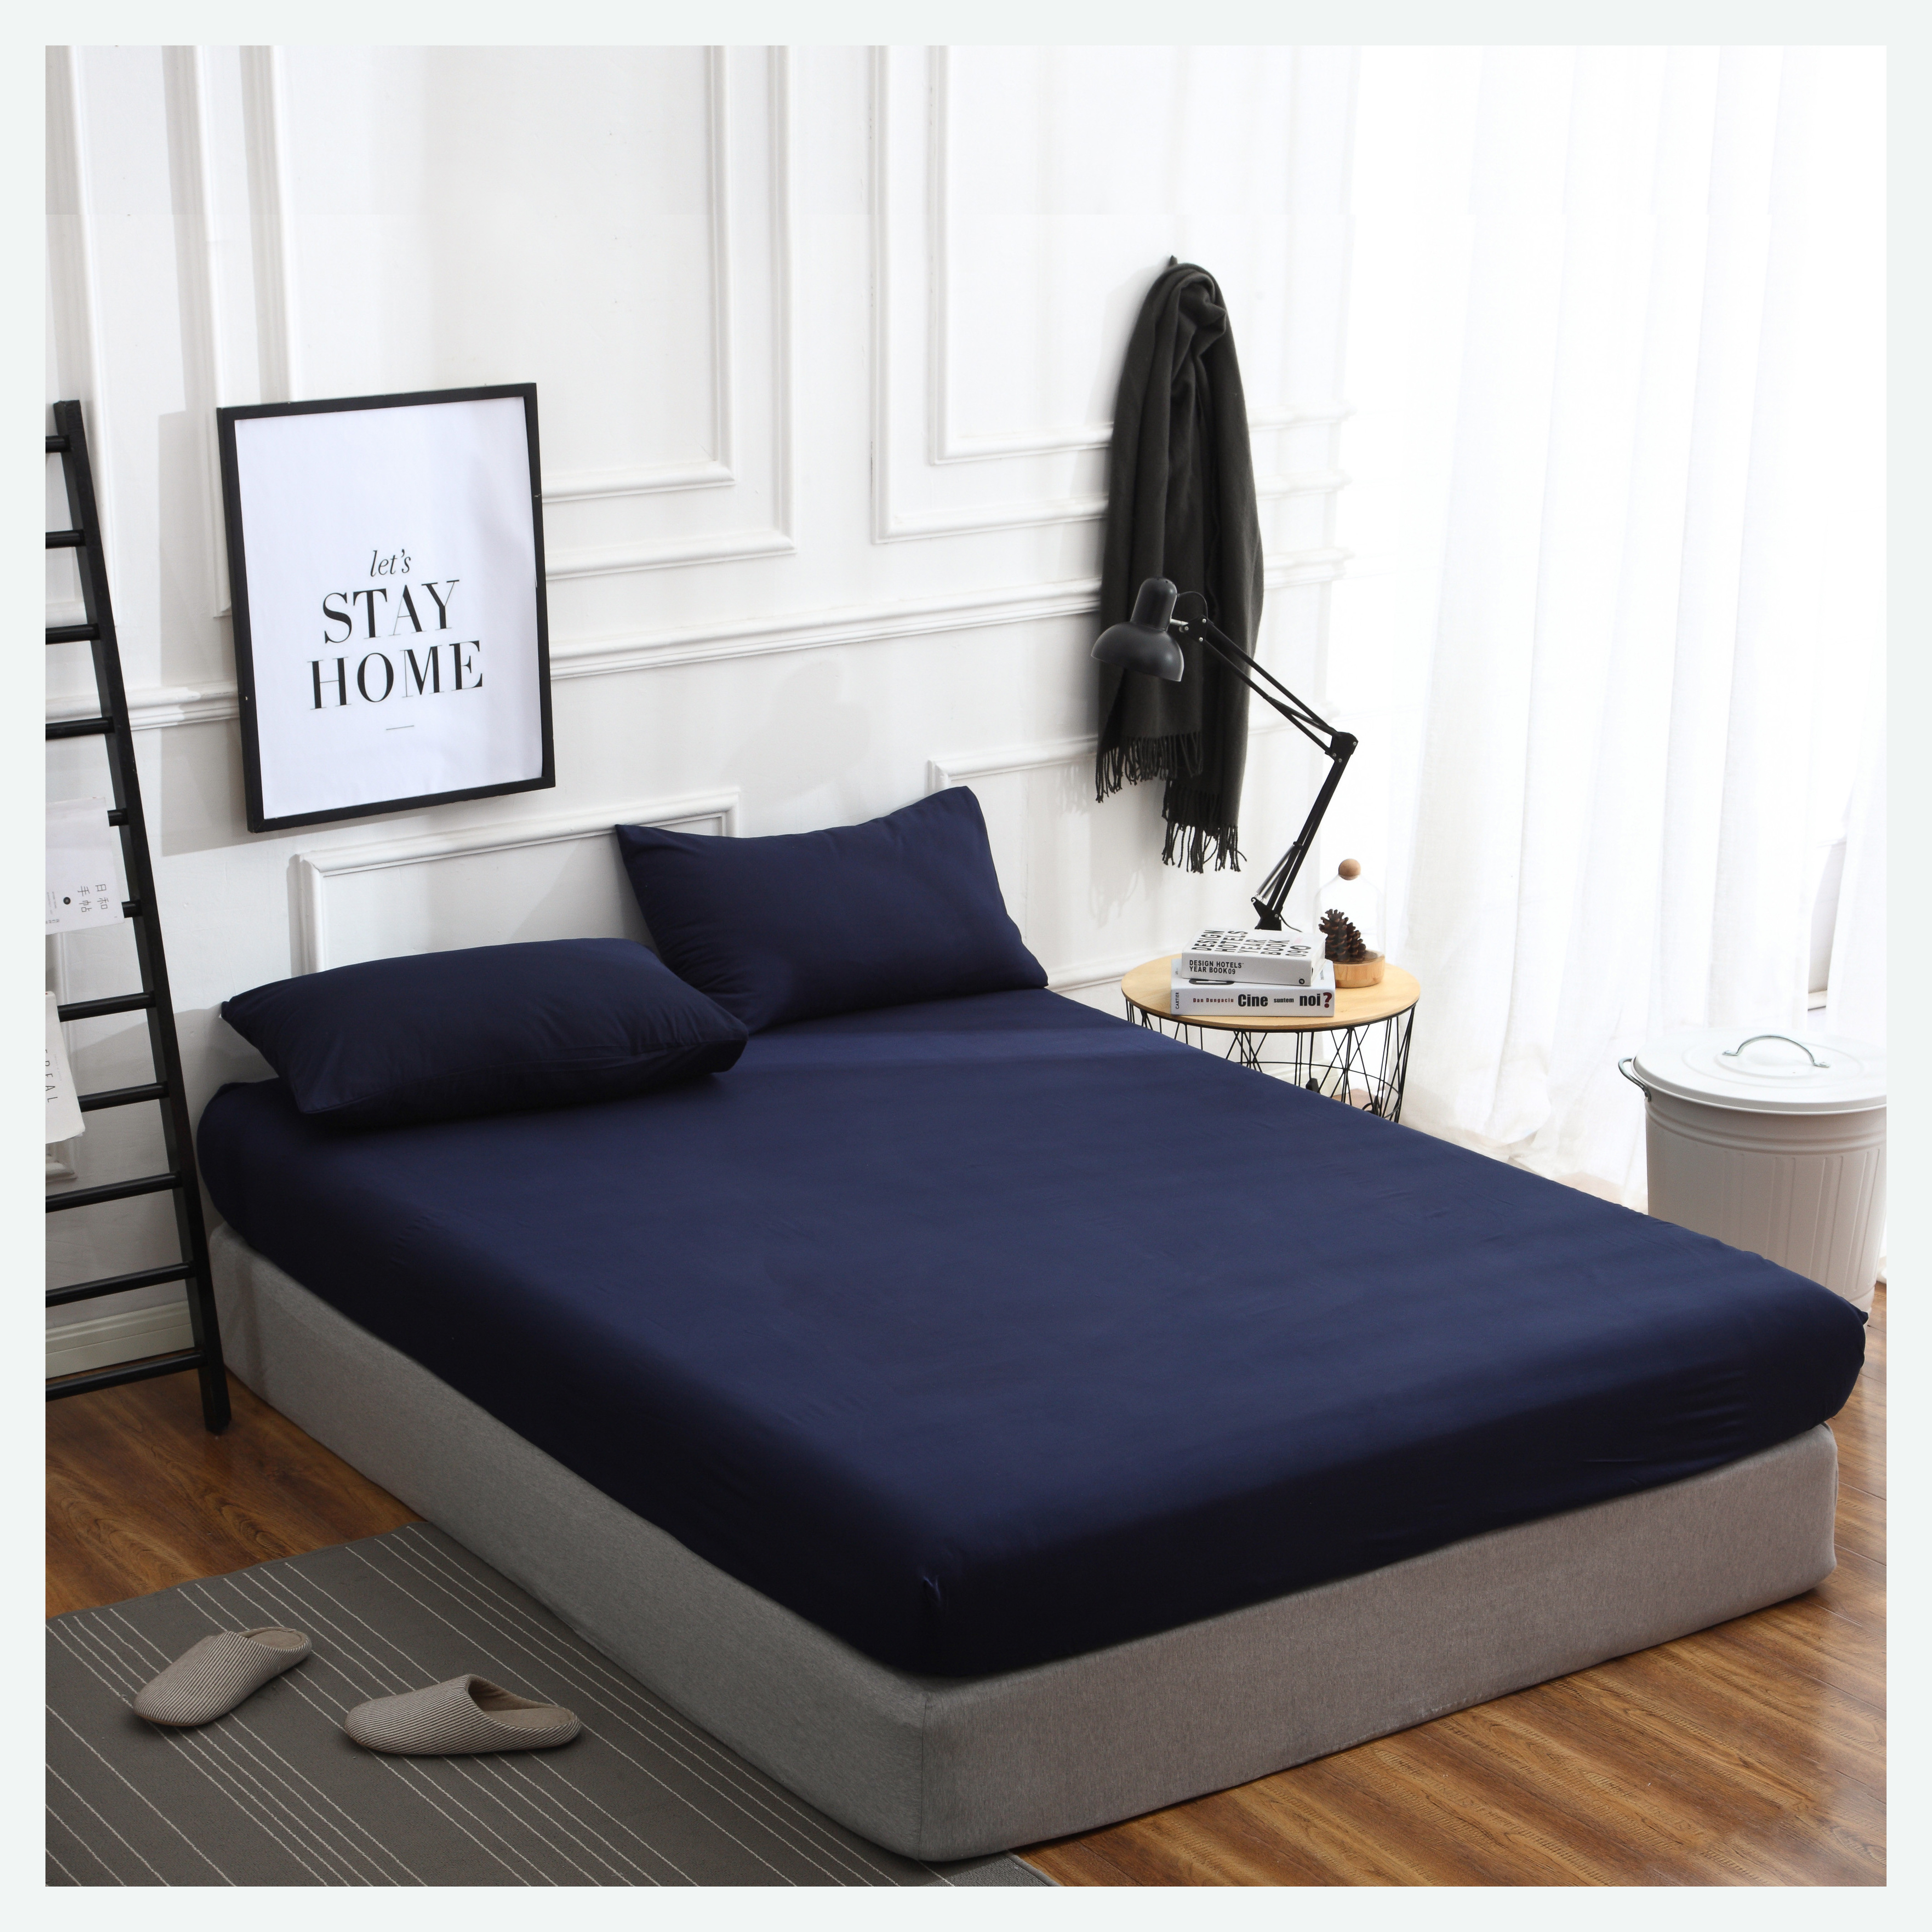 Woven solid bedding Bed Sheet Double Size Bed Sheet Set Polyester Bed Sheet and Pillow Cover